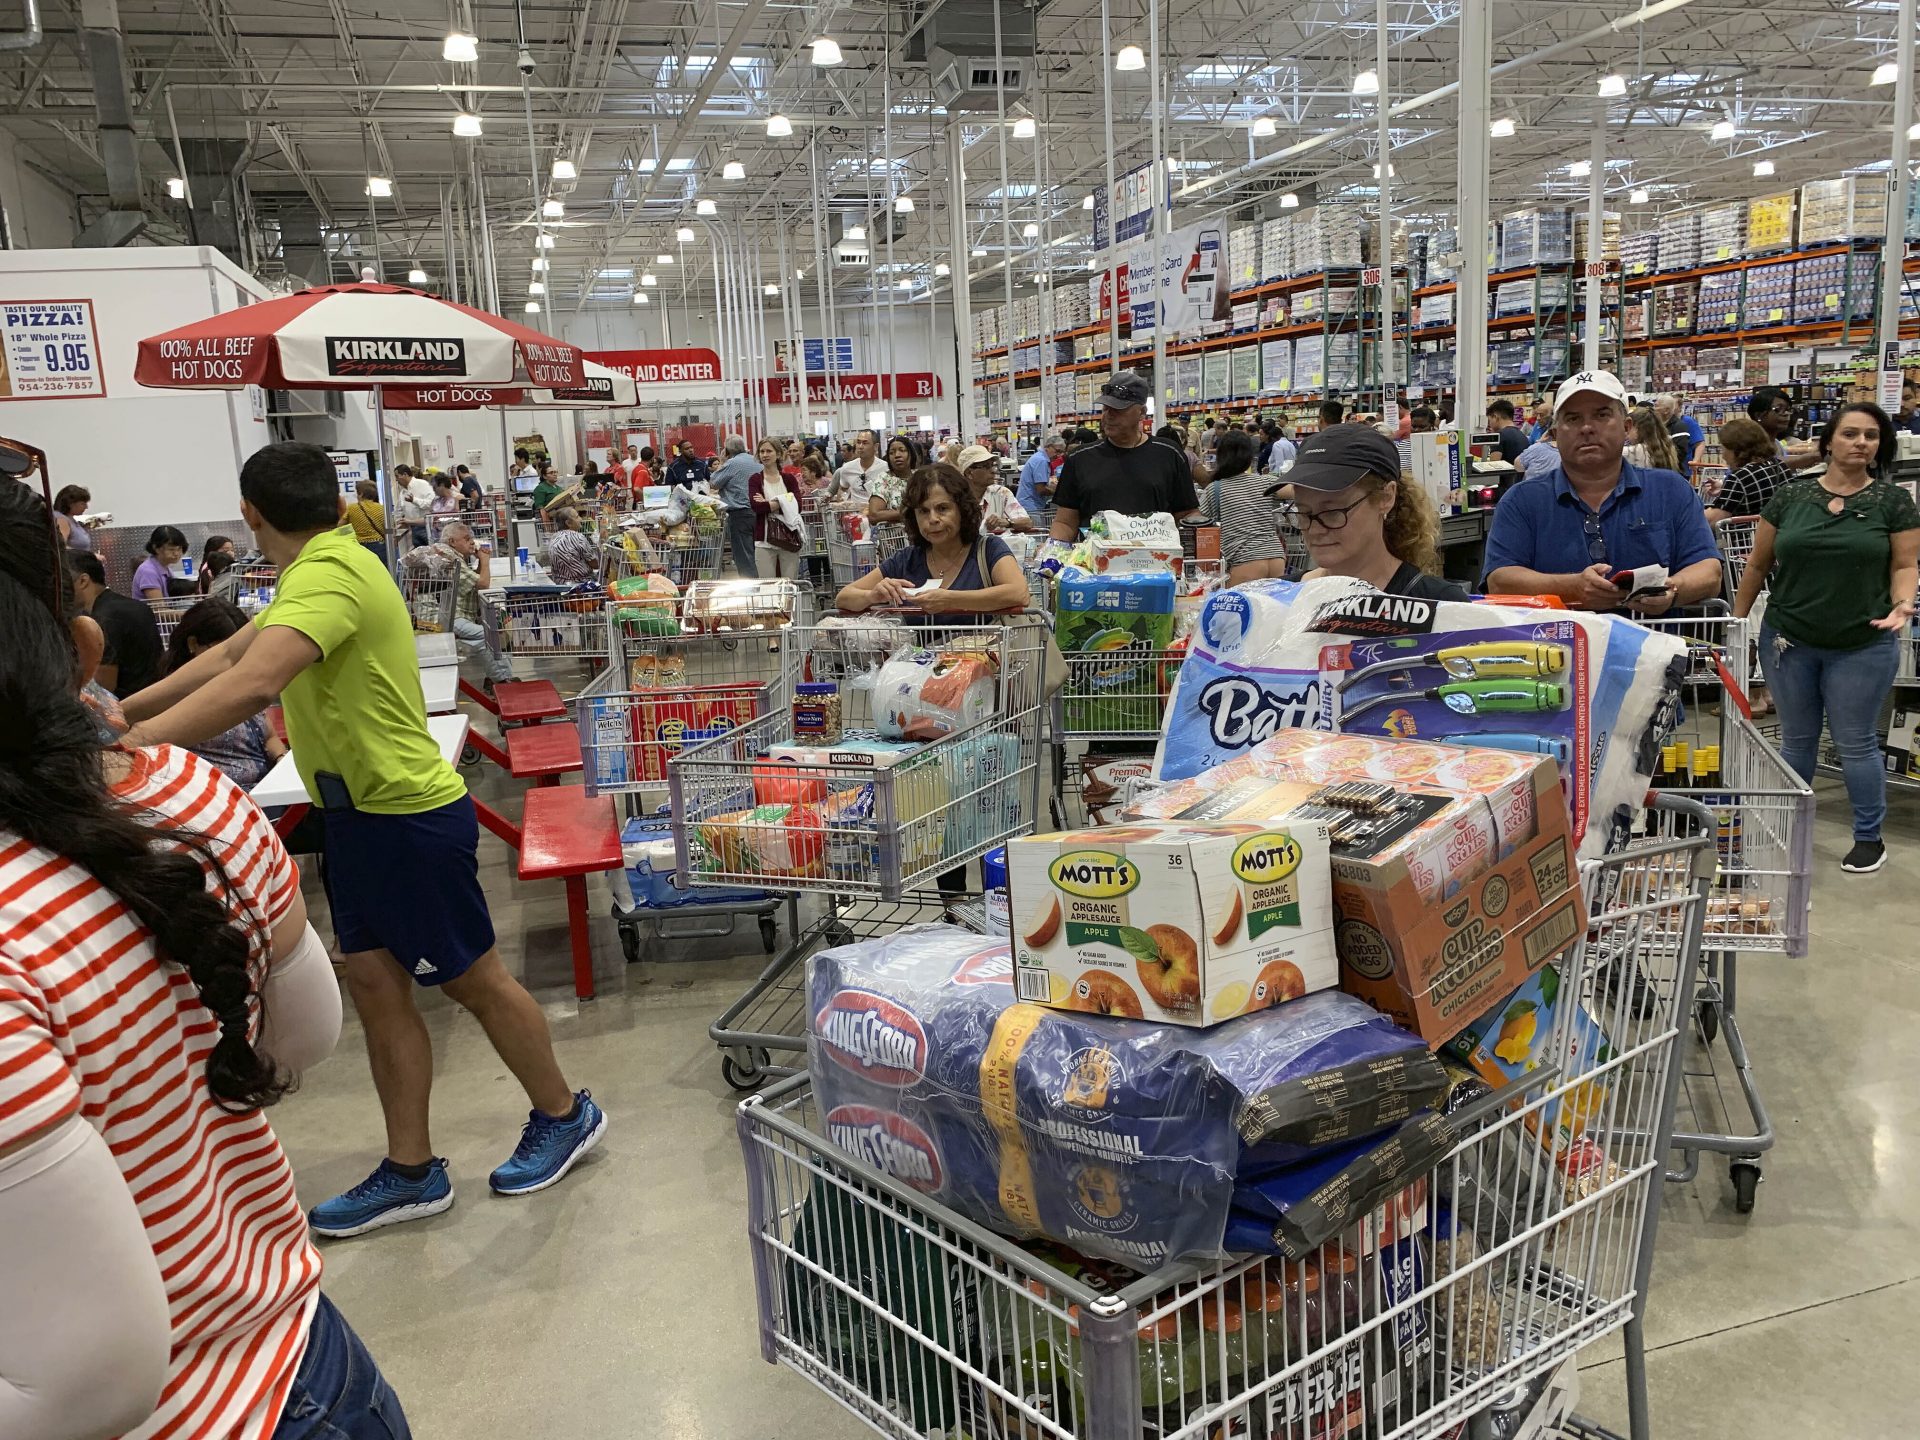 Shoppers wait in long lines at Costco, Thursday, Aug. 29, 2019, in Davie, Fla., as they stock up on supplies ahead of Hurricane Dorian.